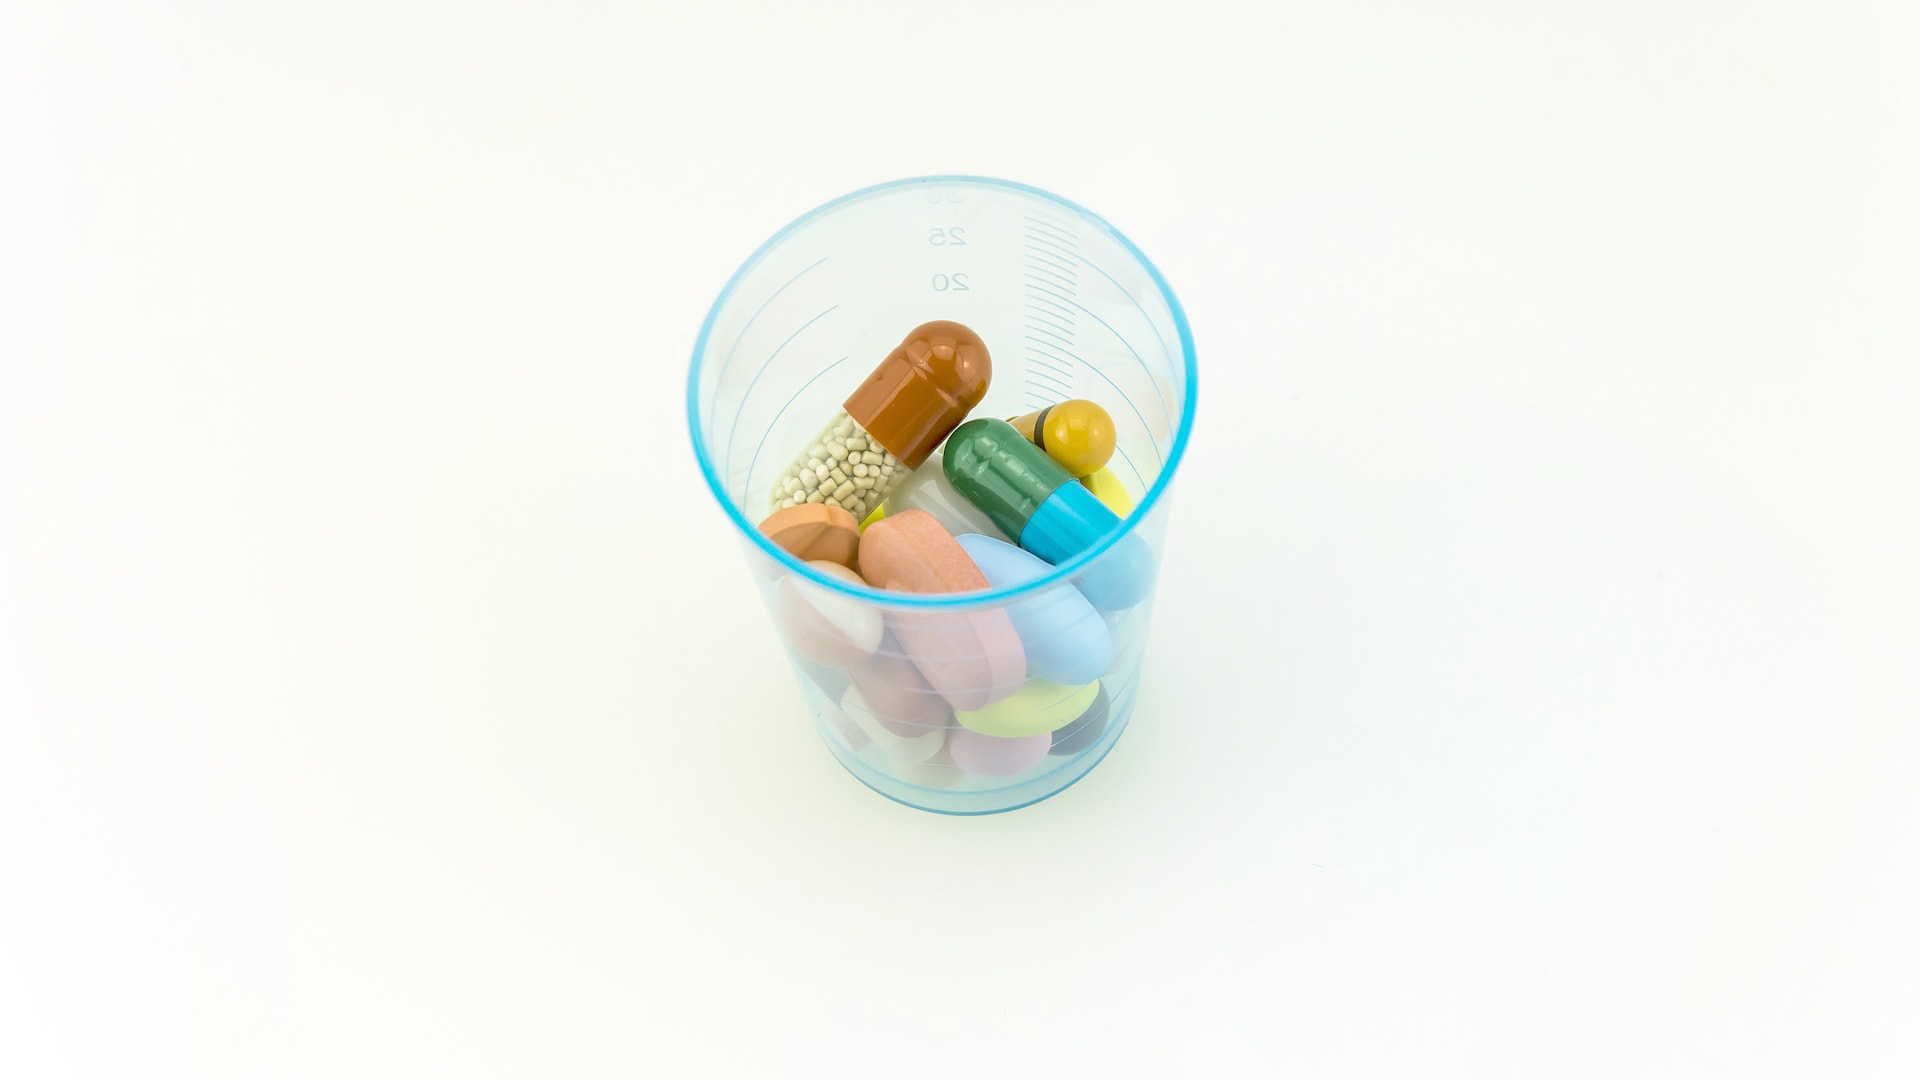 Will new vitamins study hurt (the very many) supplement startups?